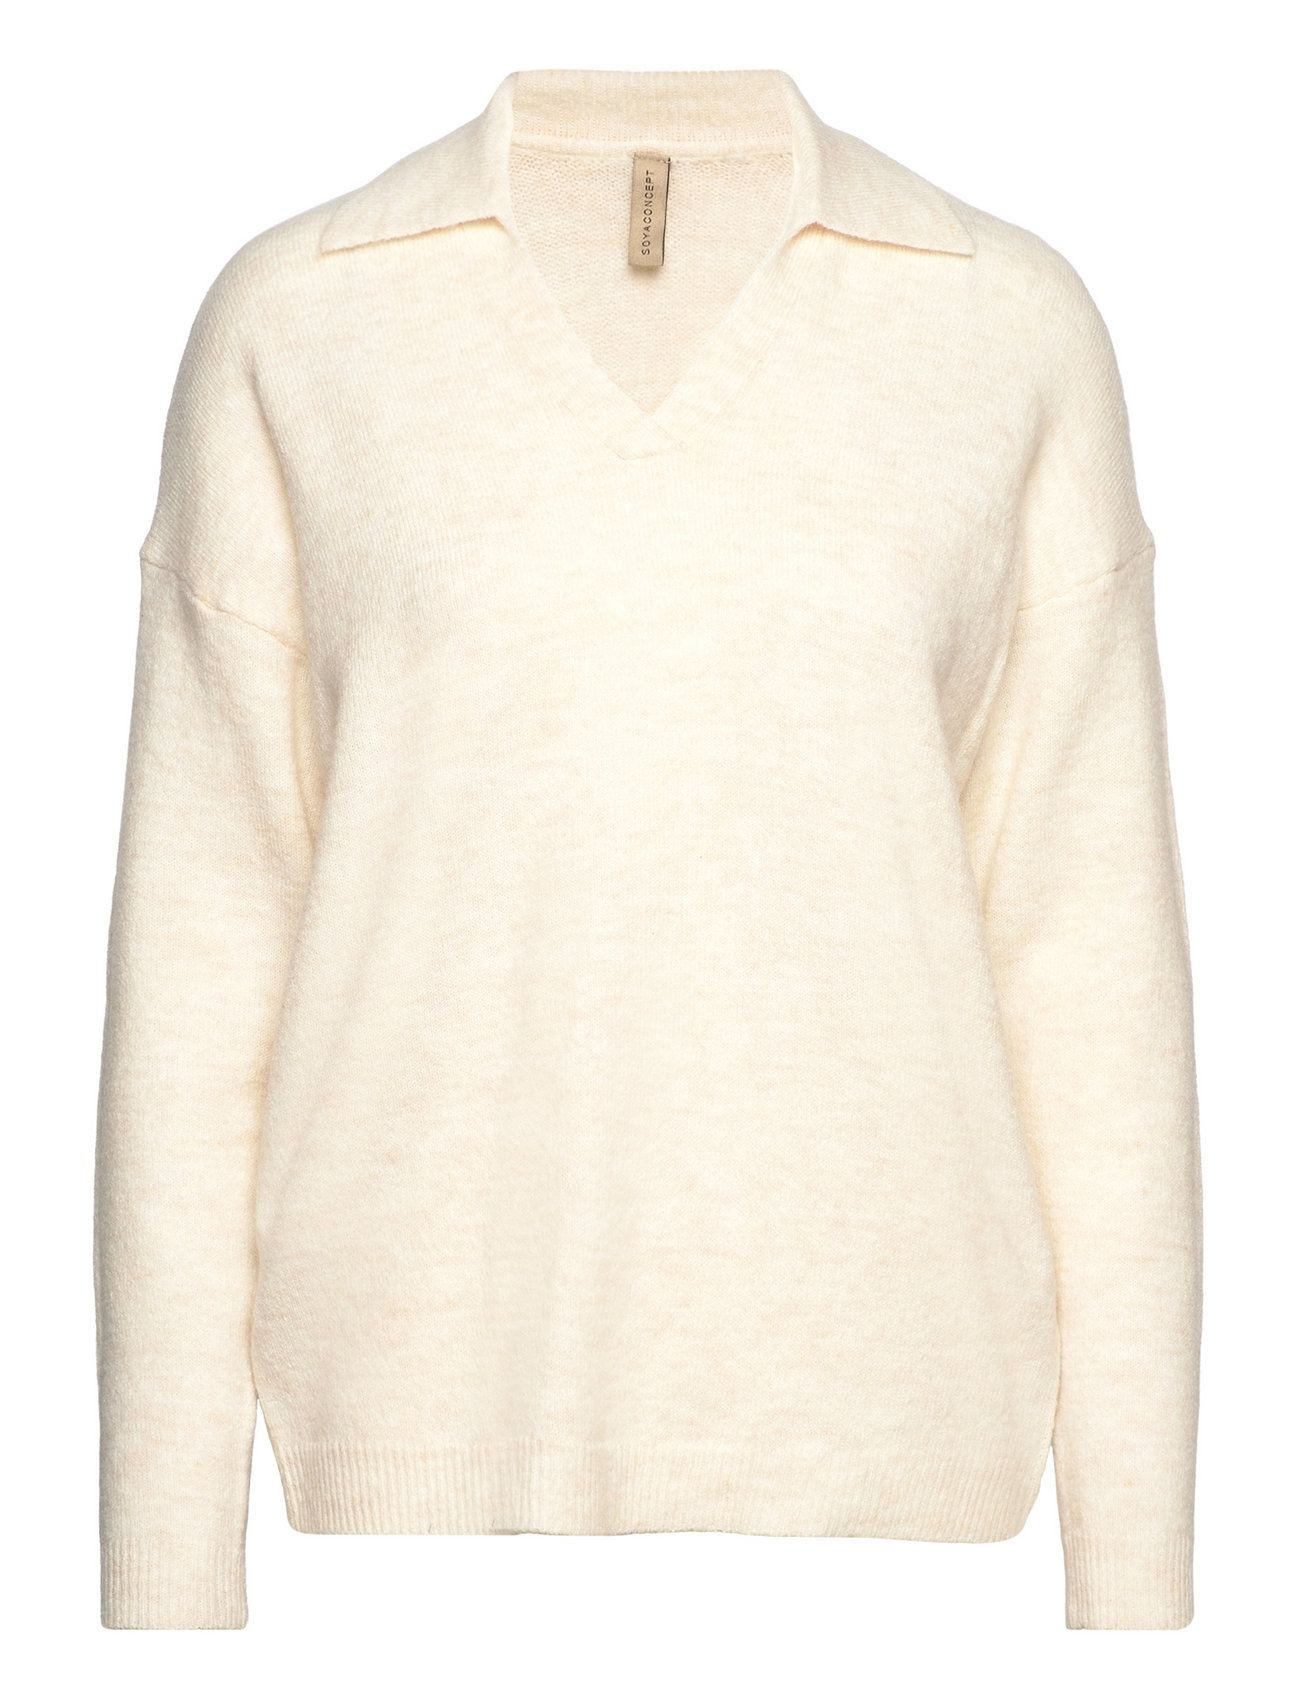 Sc-Nessie Tops Knitwear Jumpers Cream Soyaconcept